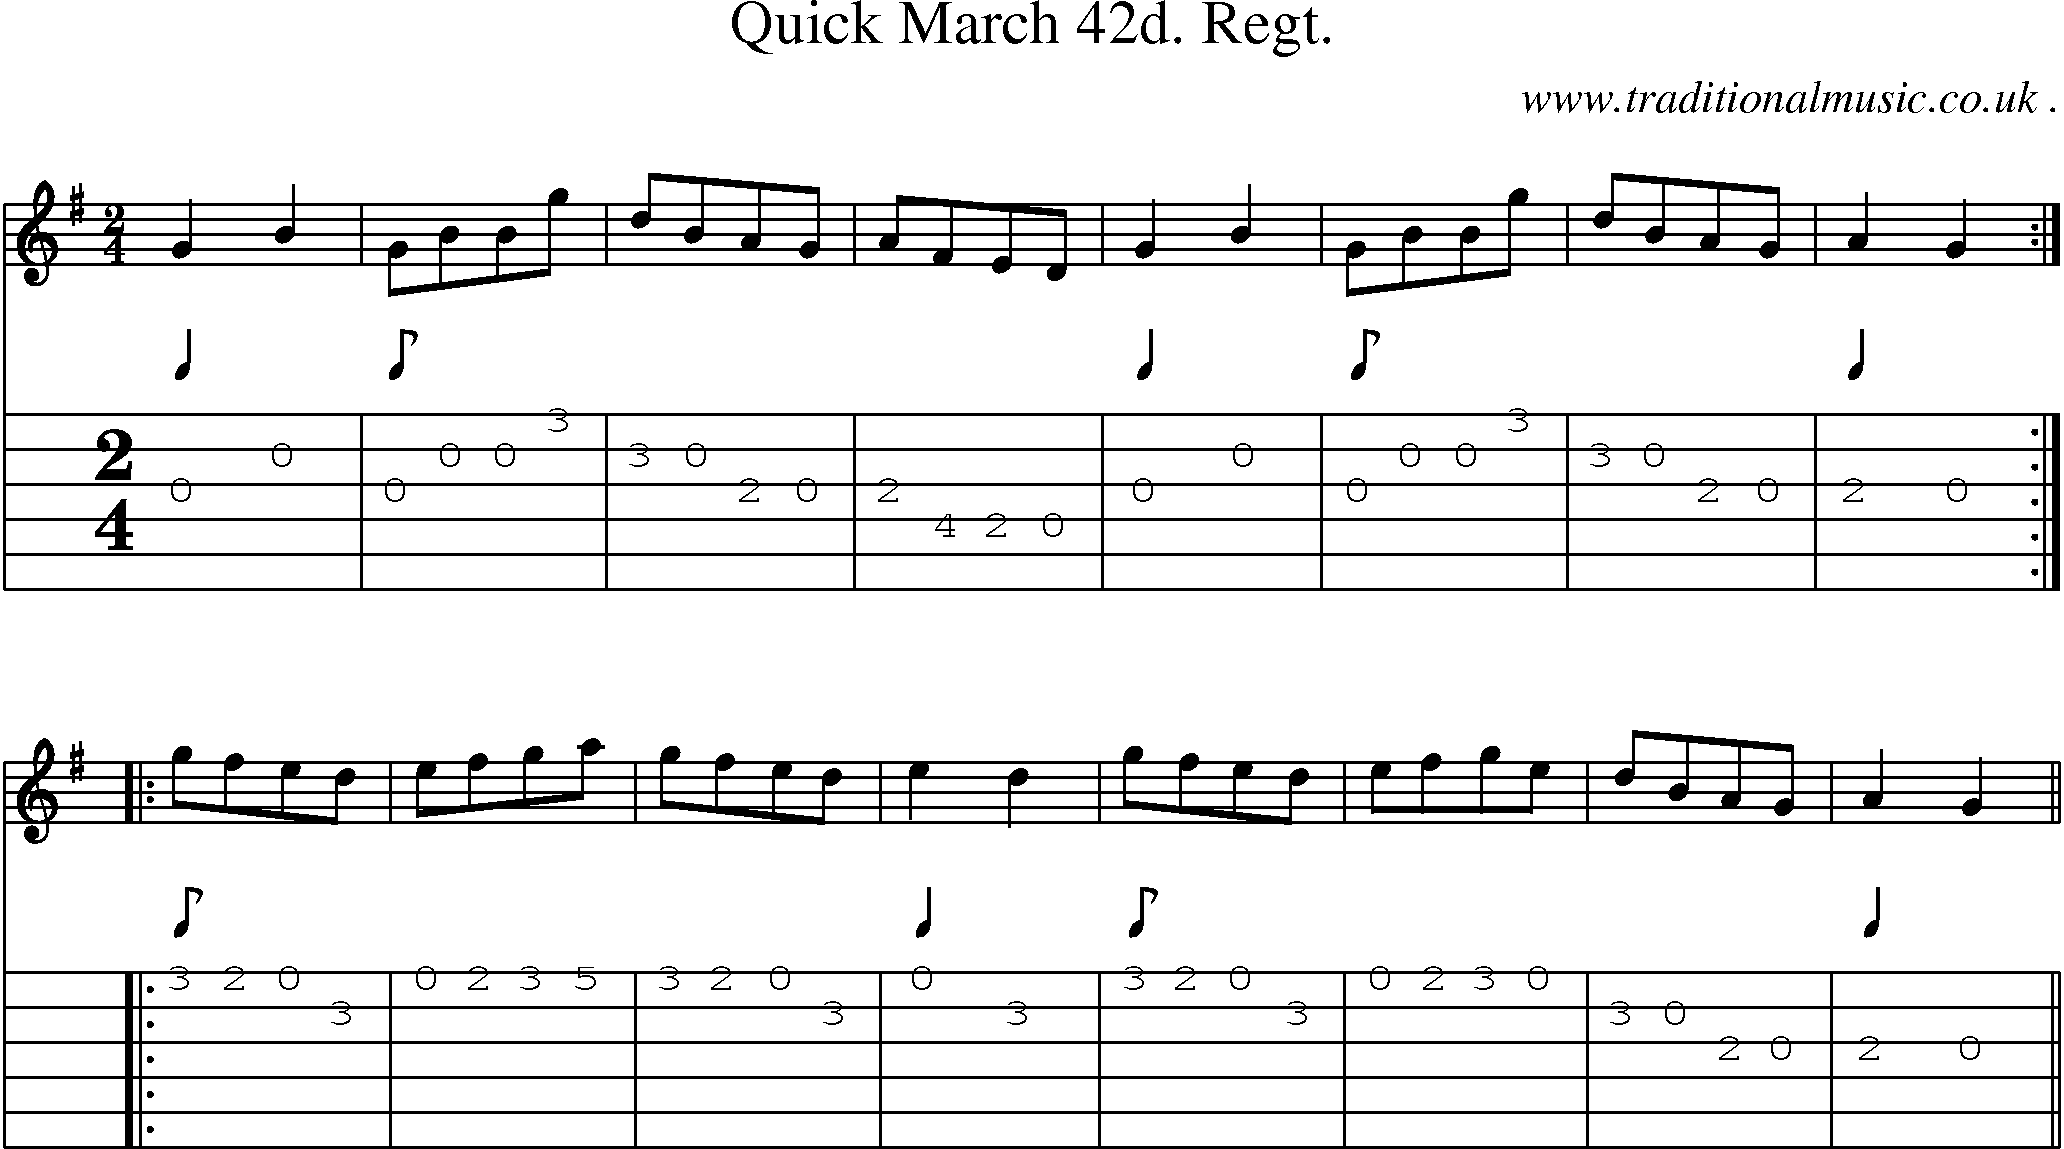 Sheet-Music and Guitar Tabs for Quick March 42d Regt